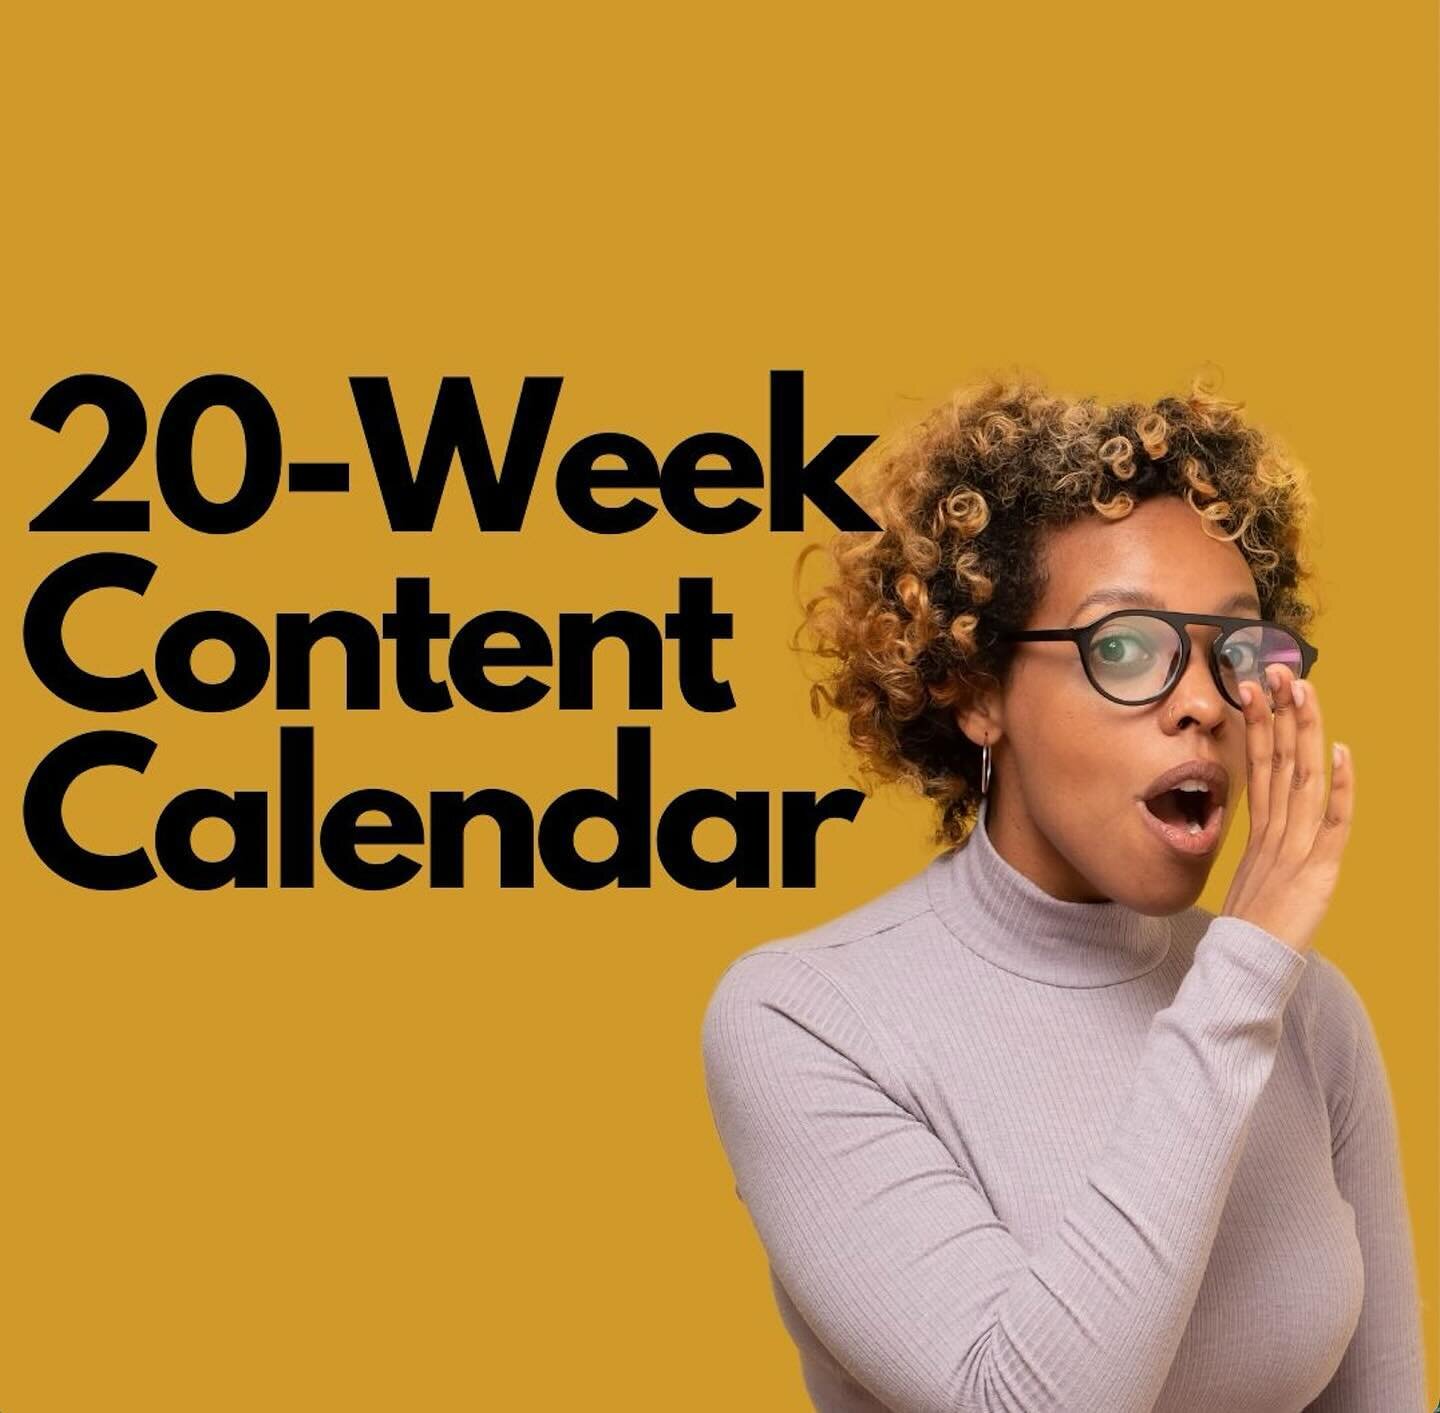 Have you heard?
Just dropped a FREE 20 week content calendar for coffee shop owners. Grab yours: https://www.effectiverestaurantmarketing.net/20weekcontent